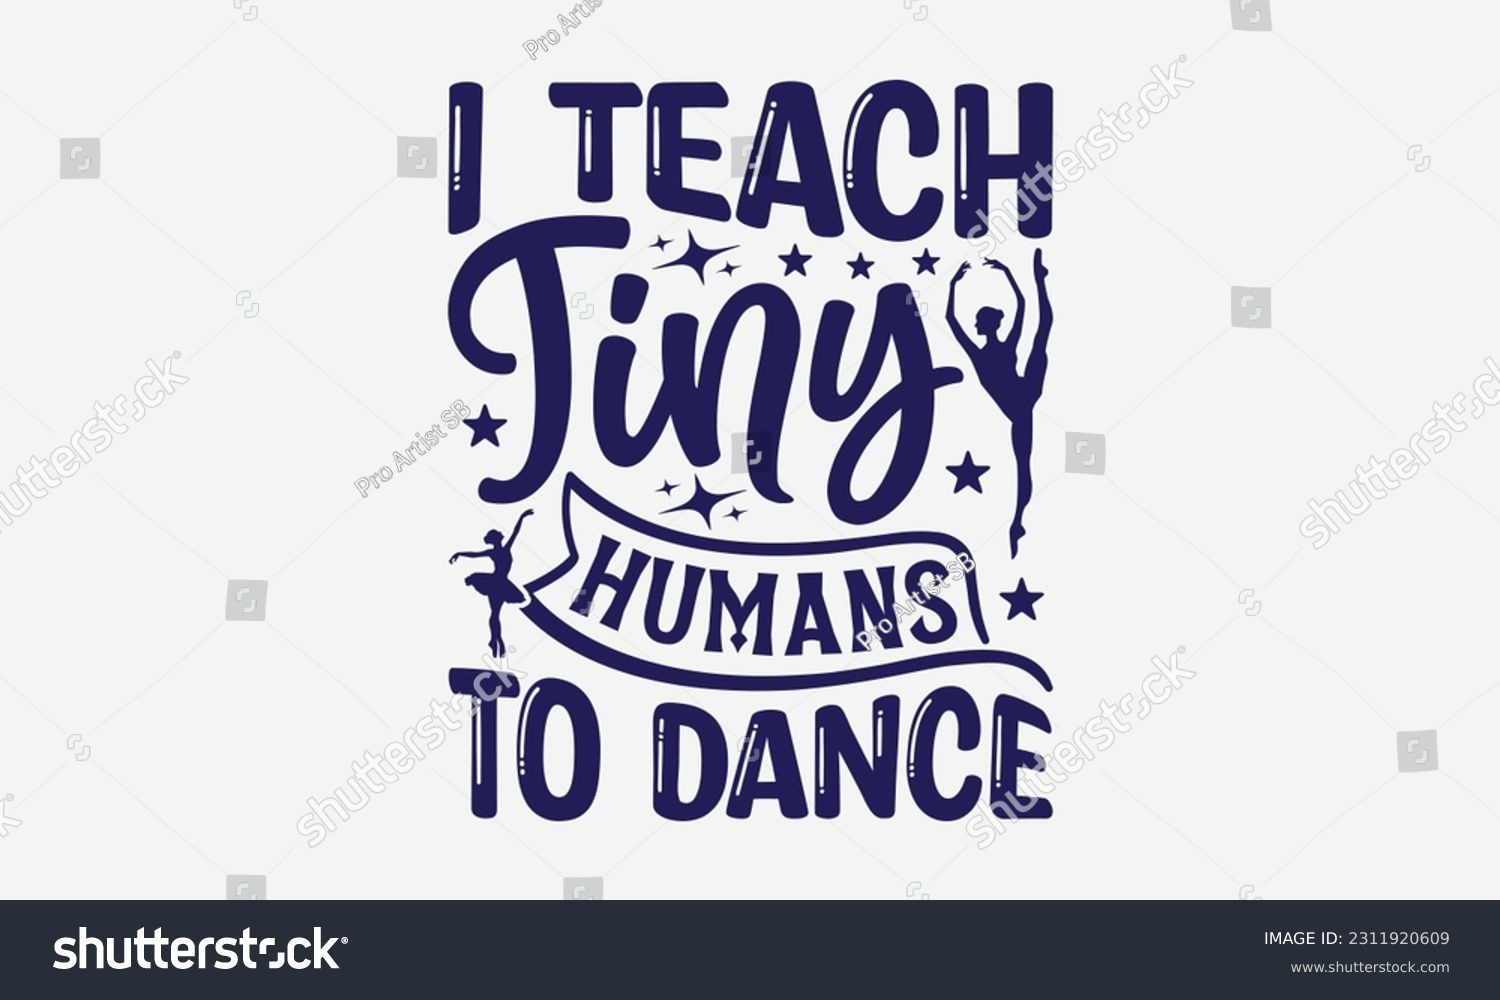 SVG of I Teach Tiny Humans To Dance - Dancing SVG Design, Dance Quotes, Hand Drawn Vintage Hand Lettering, Poster Vector Design Template, EPS 10. svg